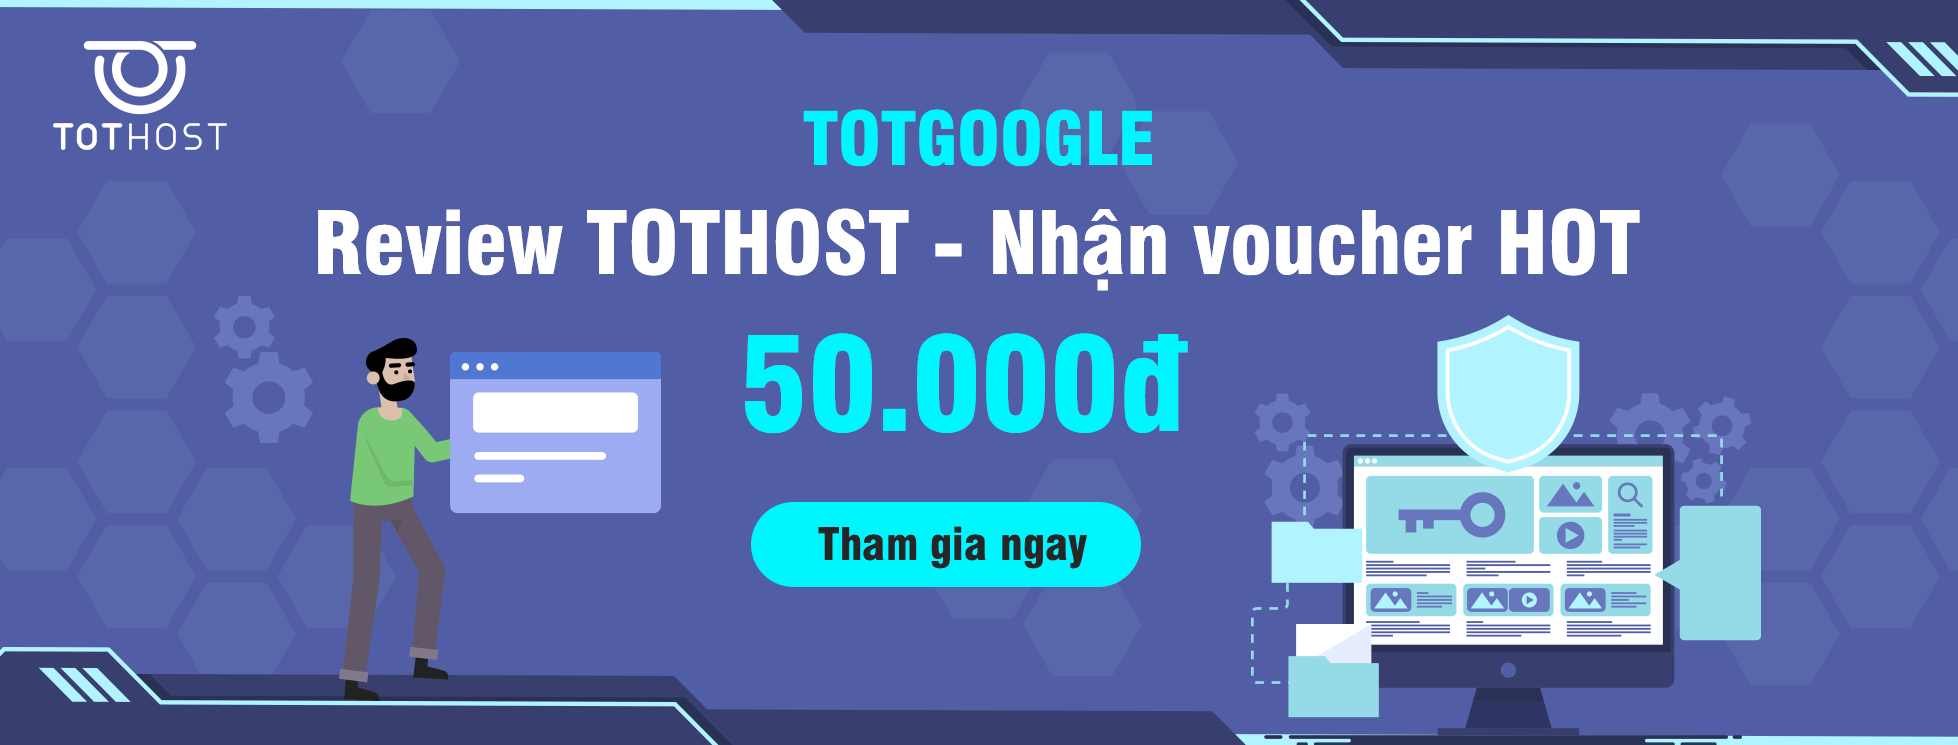 TOTGOOGLE: Review TotHost – Nhận voucher hot